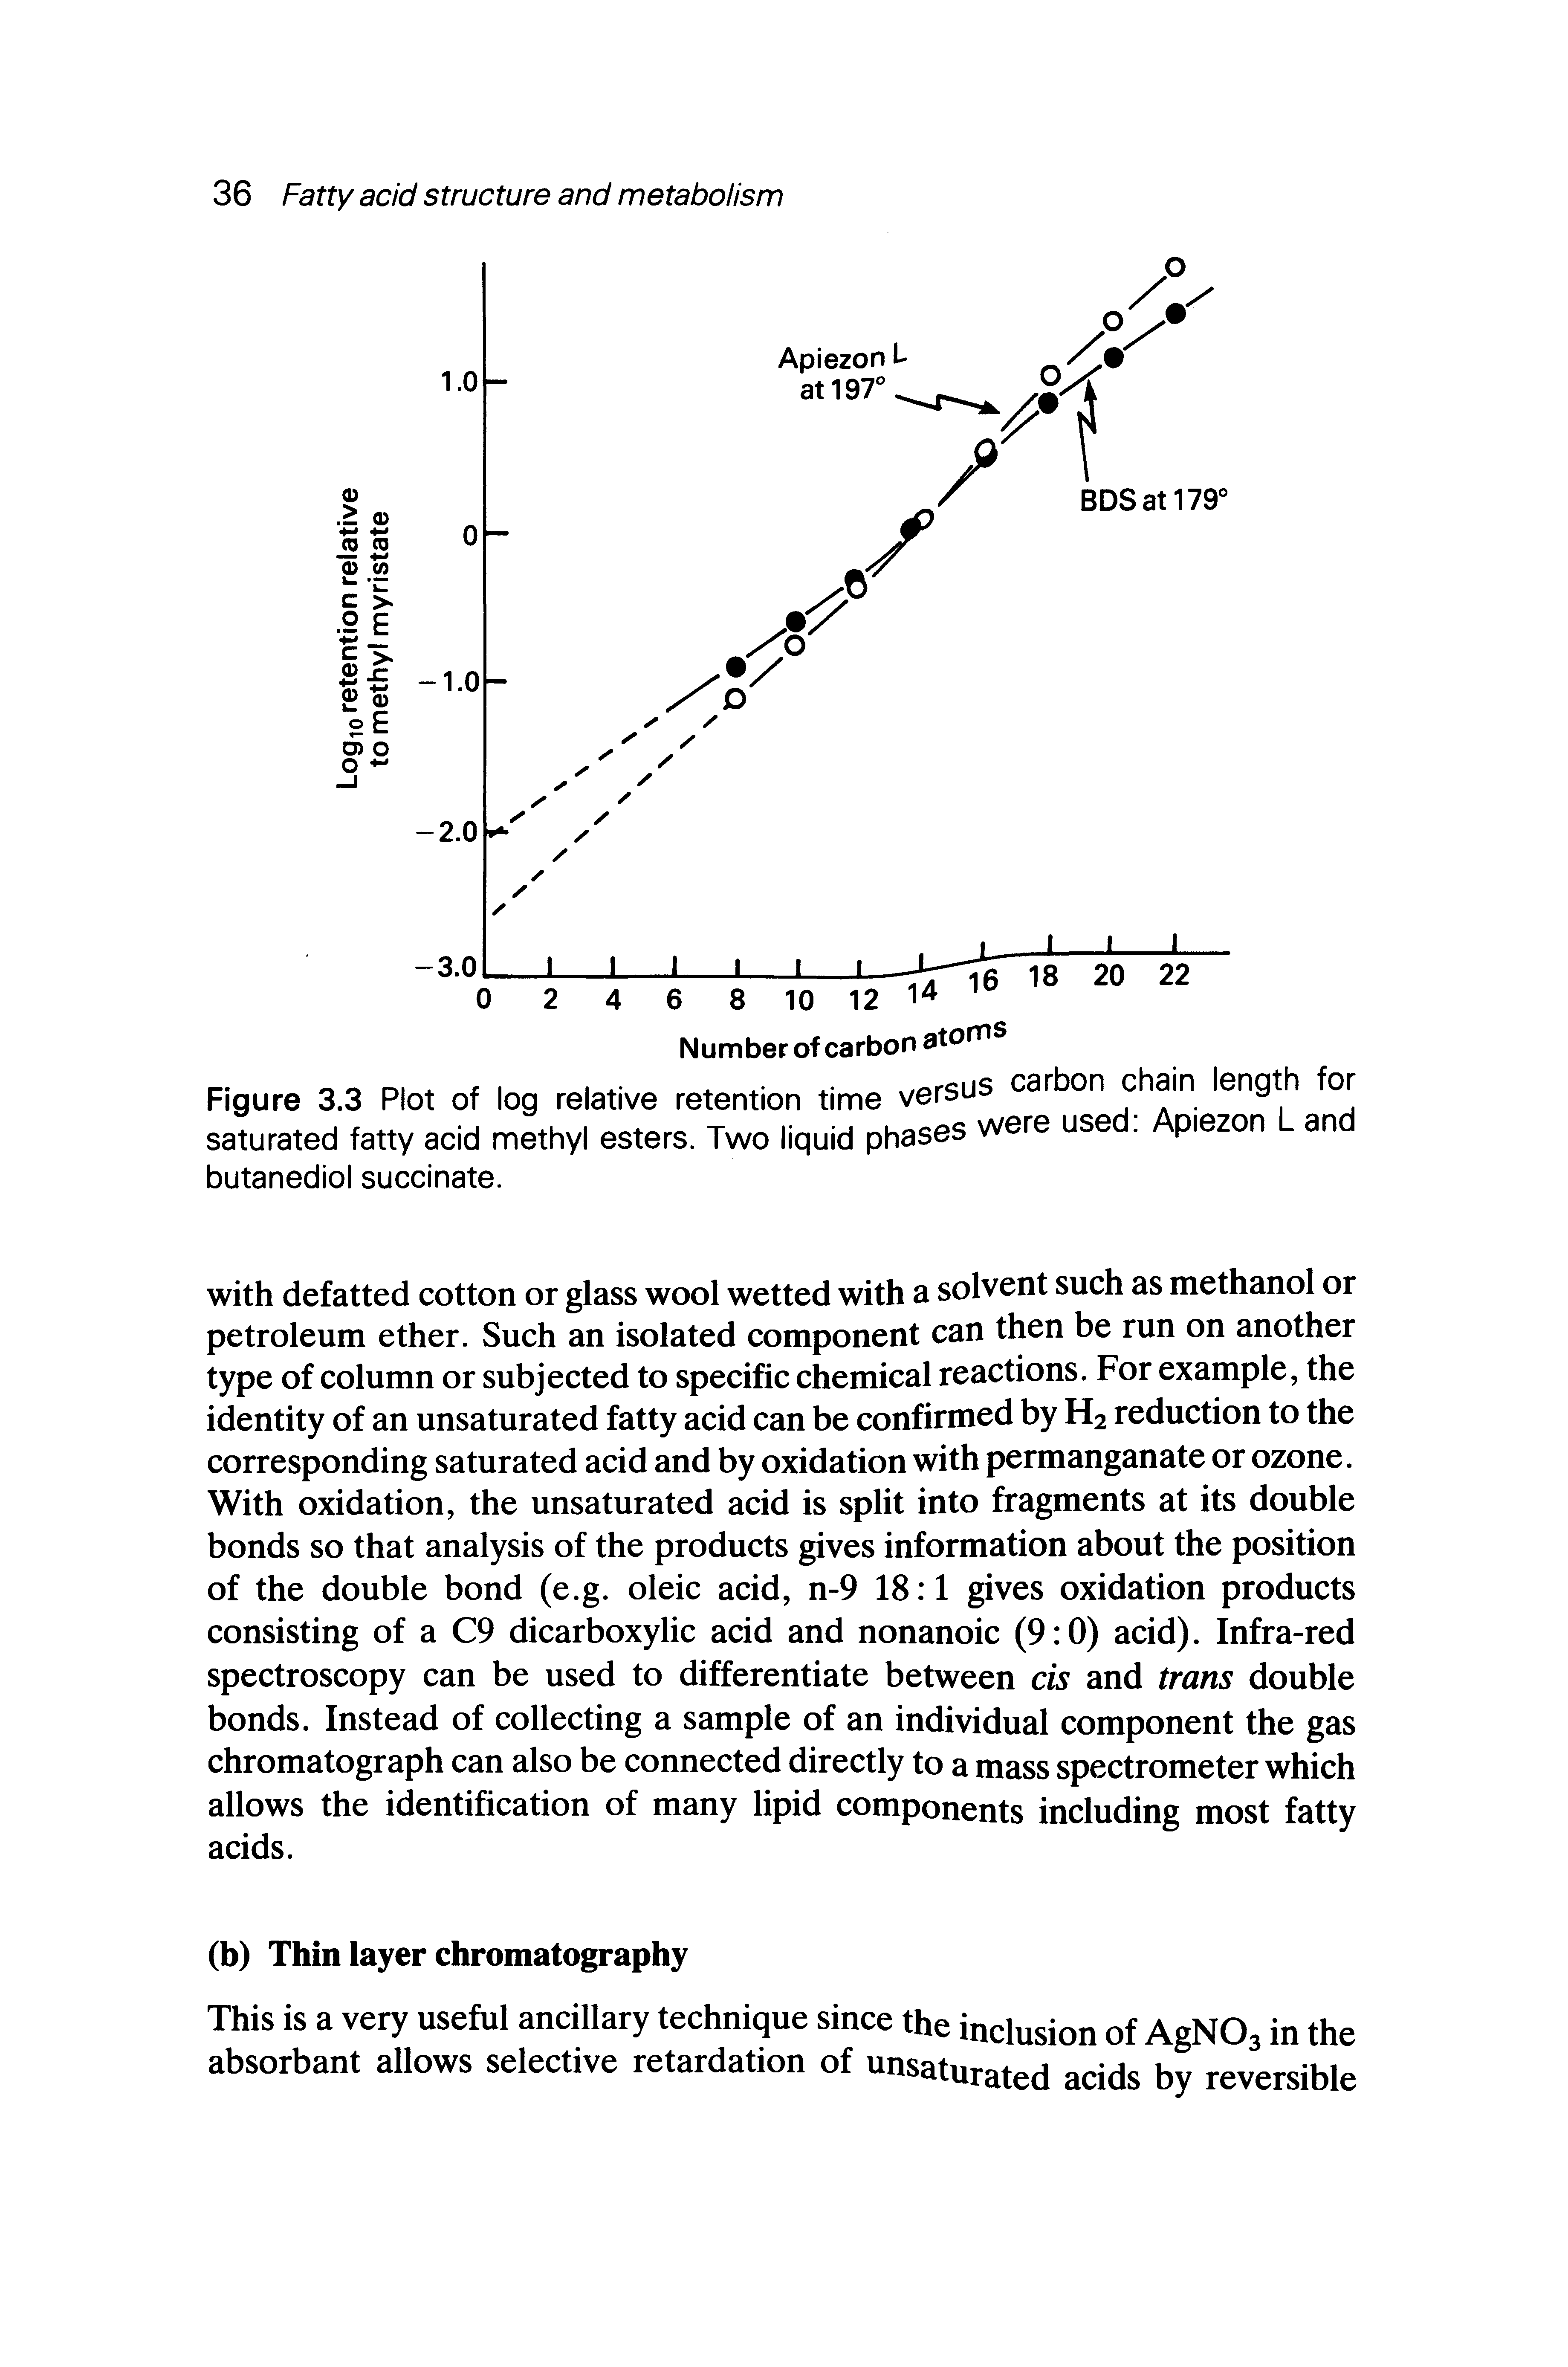 Figure 3.3 Plot of log relative retention time versus carbon chain length for saturated fatty acid methyl esters. Two liquid phases were used Apiezon L and butanediol succinate.